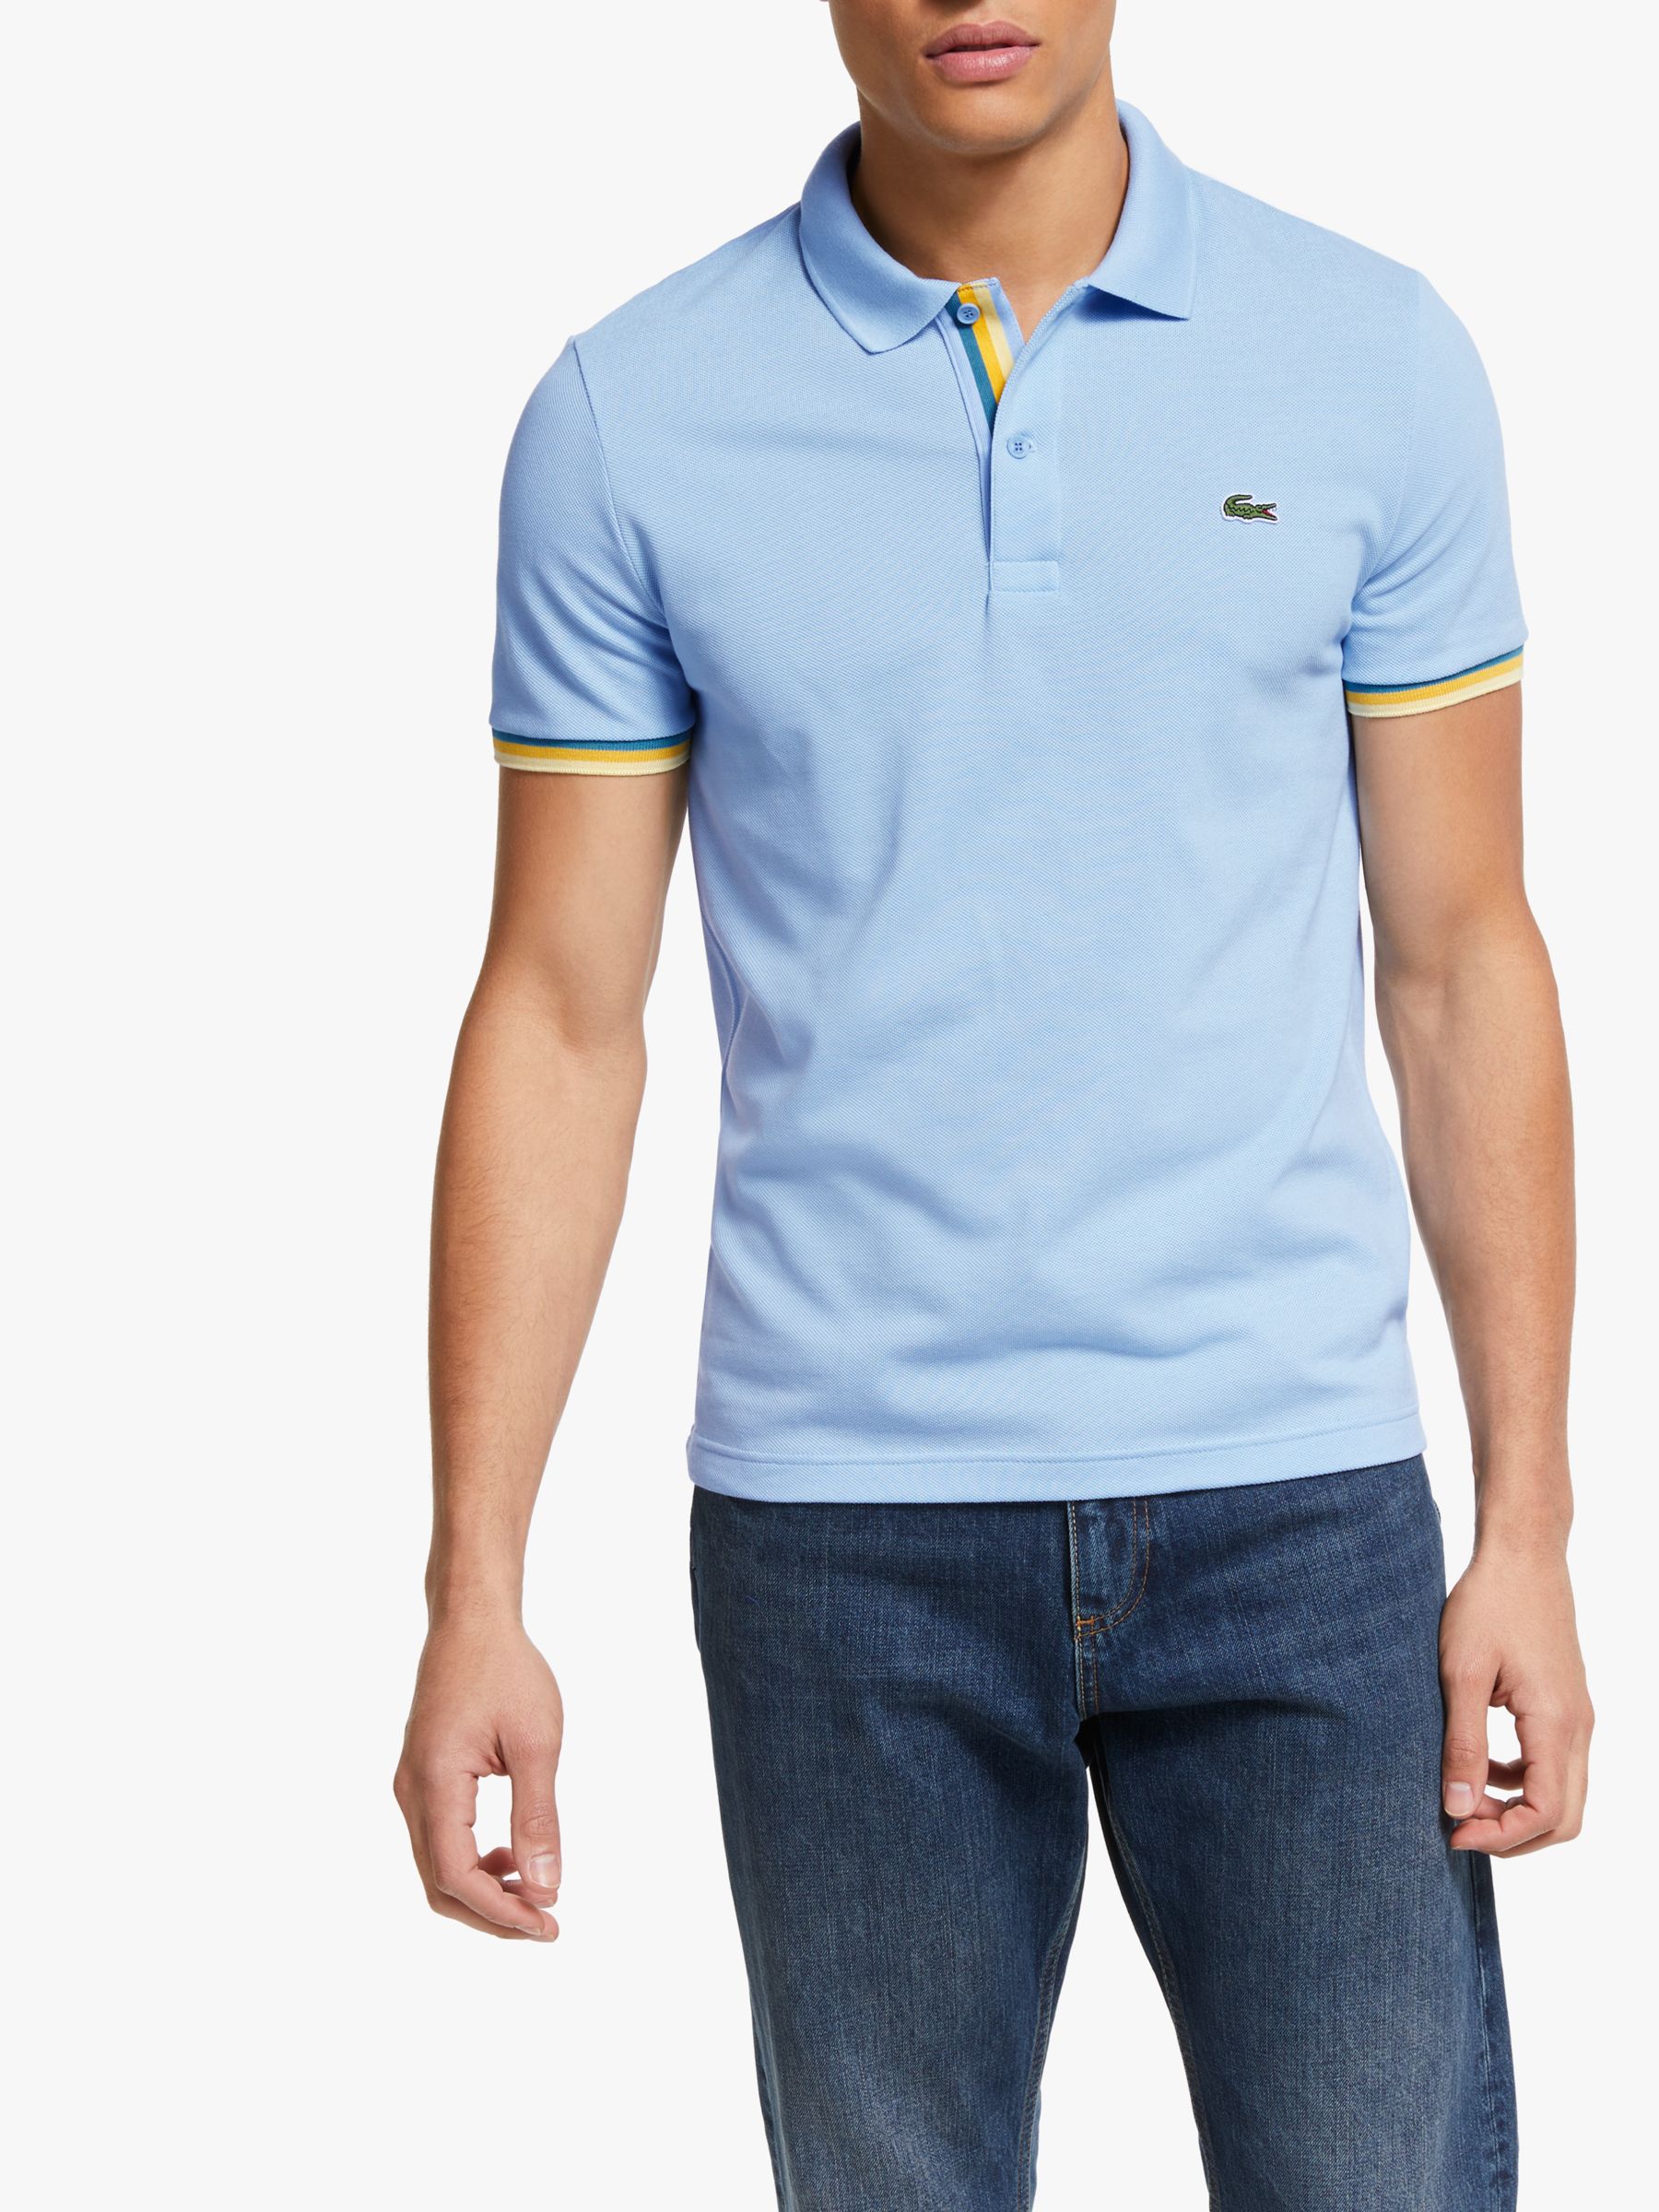 Lacoste Tipped Short Sleeve Polo Shirt 